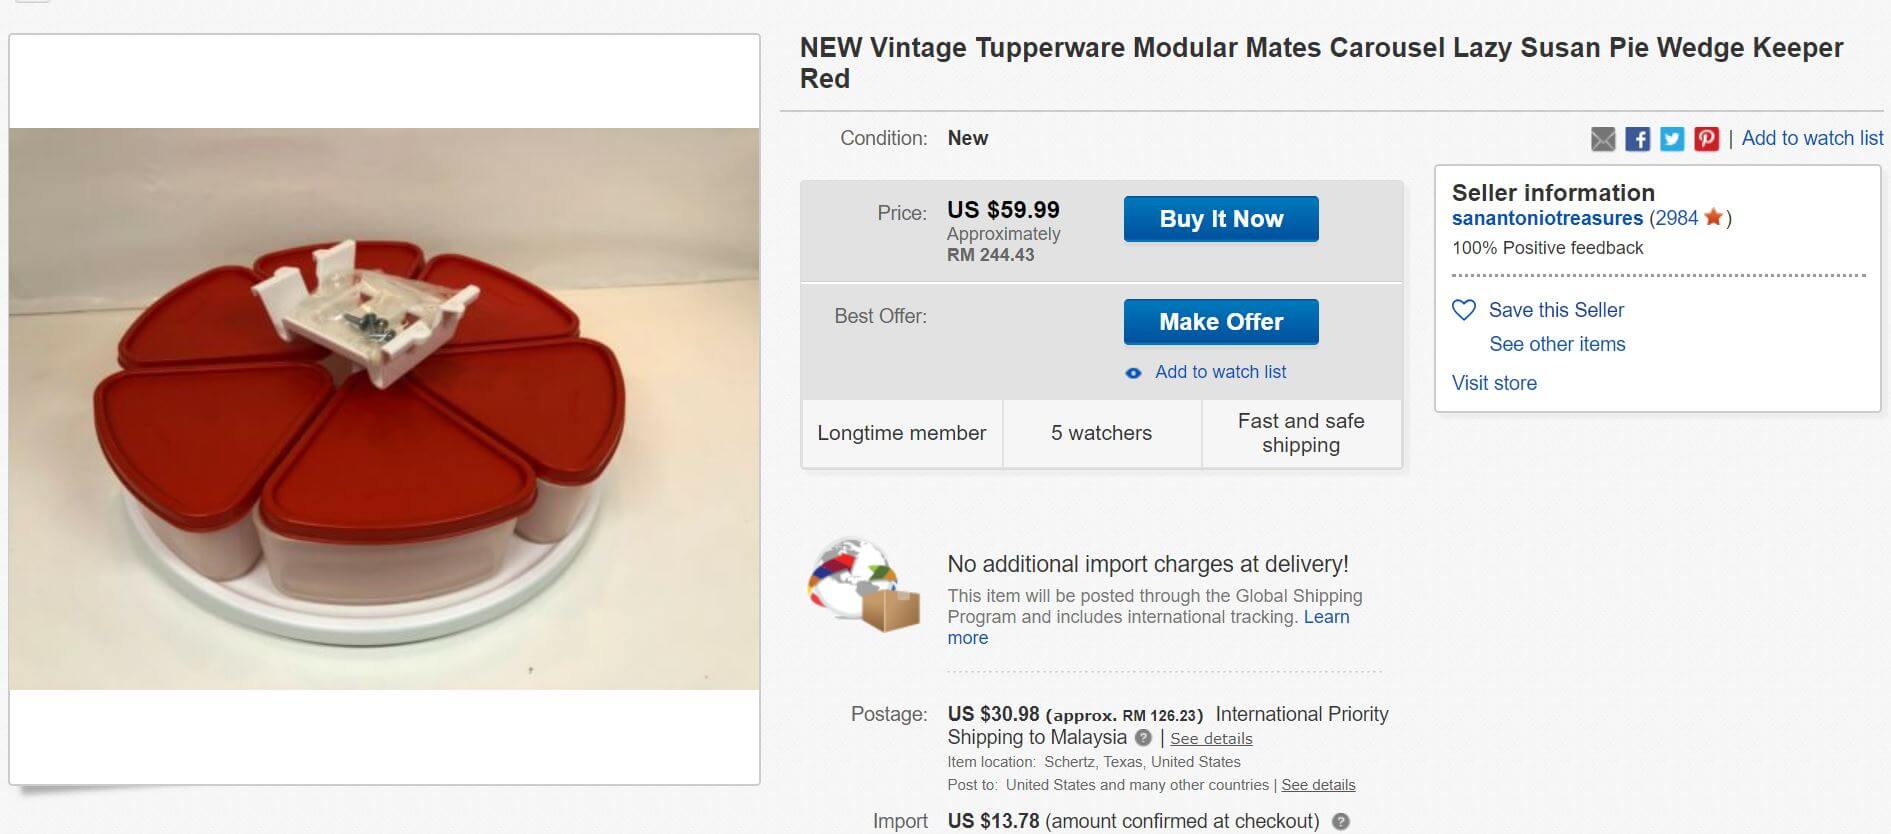 Your Mum's Tupperware Might Be Worth Hundreds of Ringgit On Etsy and eBay! - WORLD OF BUZZ 4